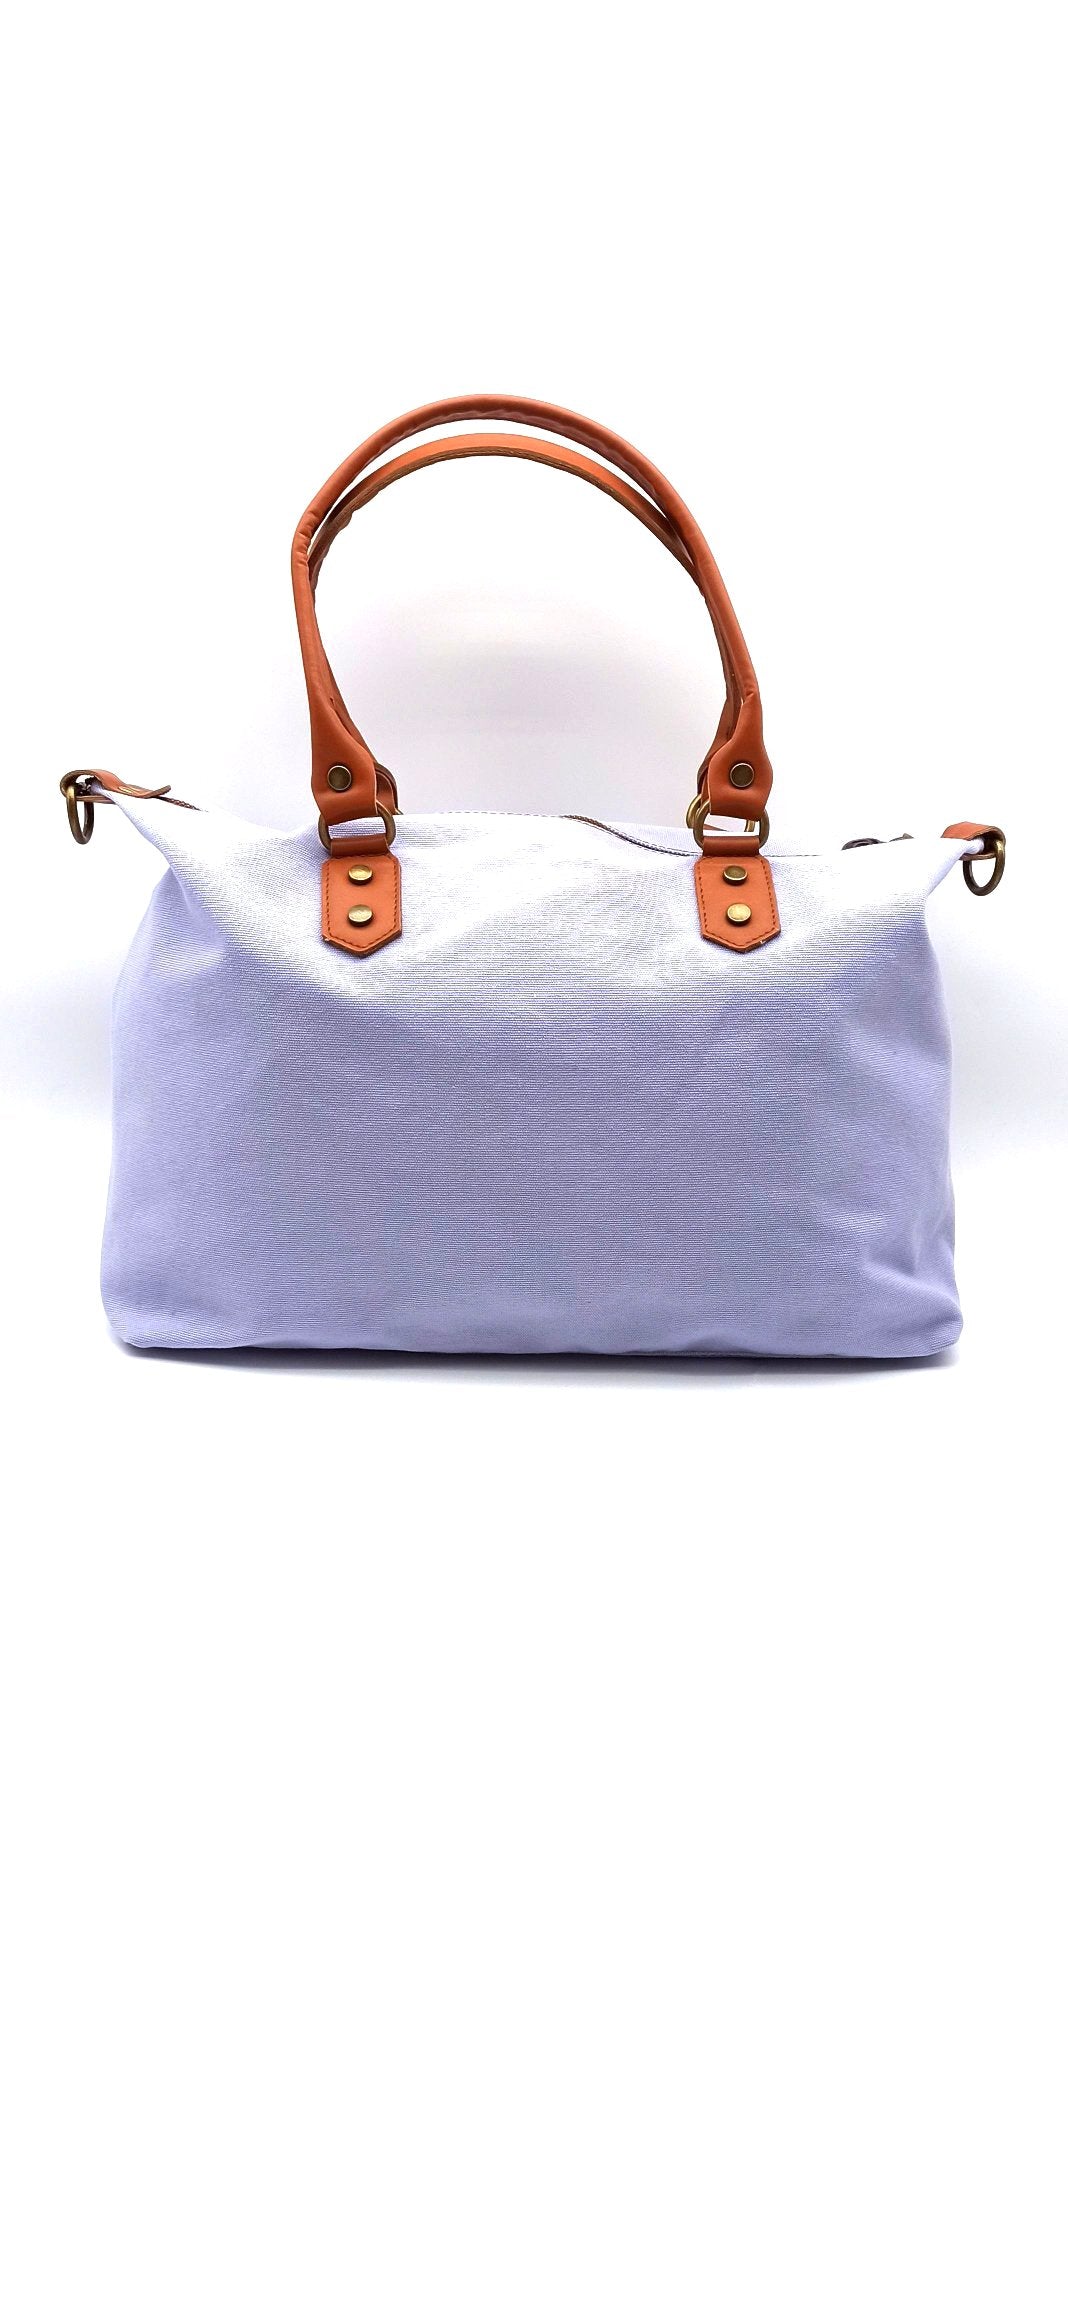 Baggy cotton and regenerated leather unisex Qoolst women's and men's shopper shoulder bag